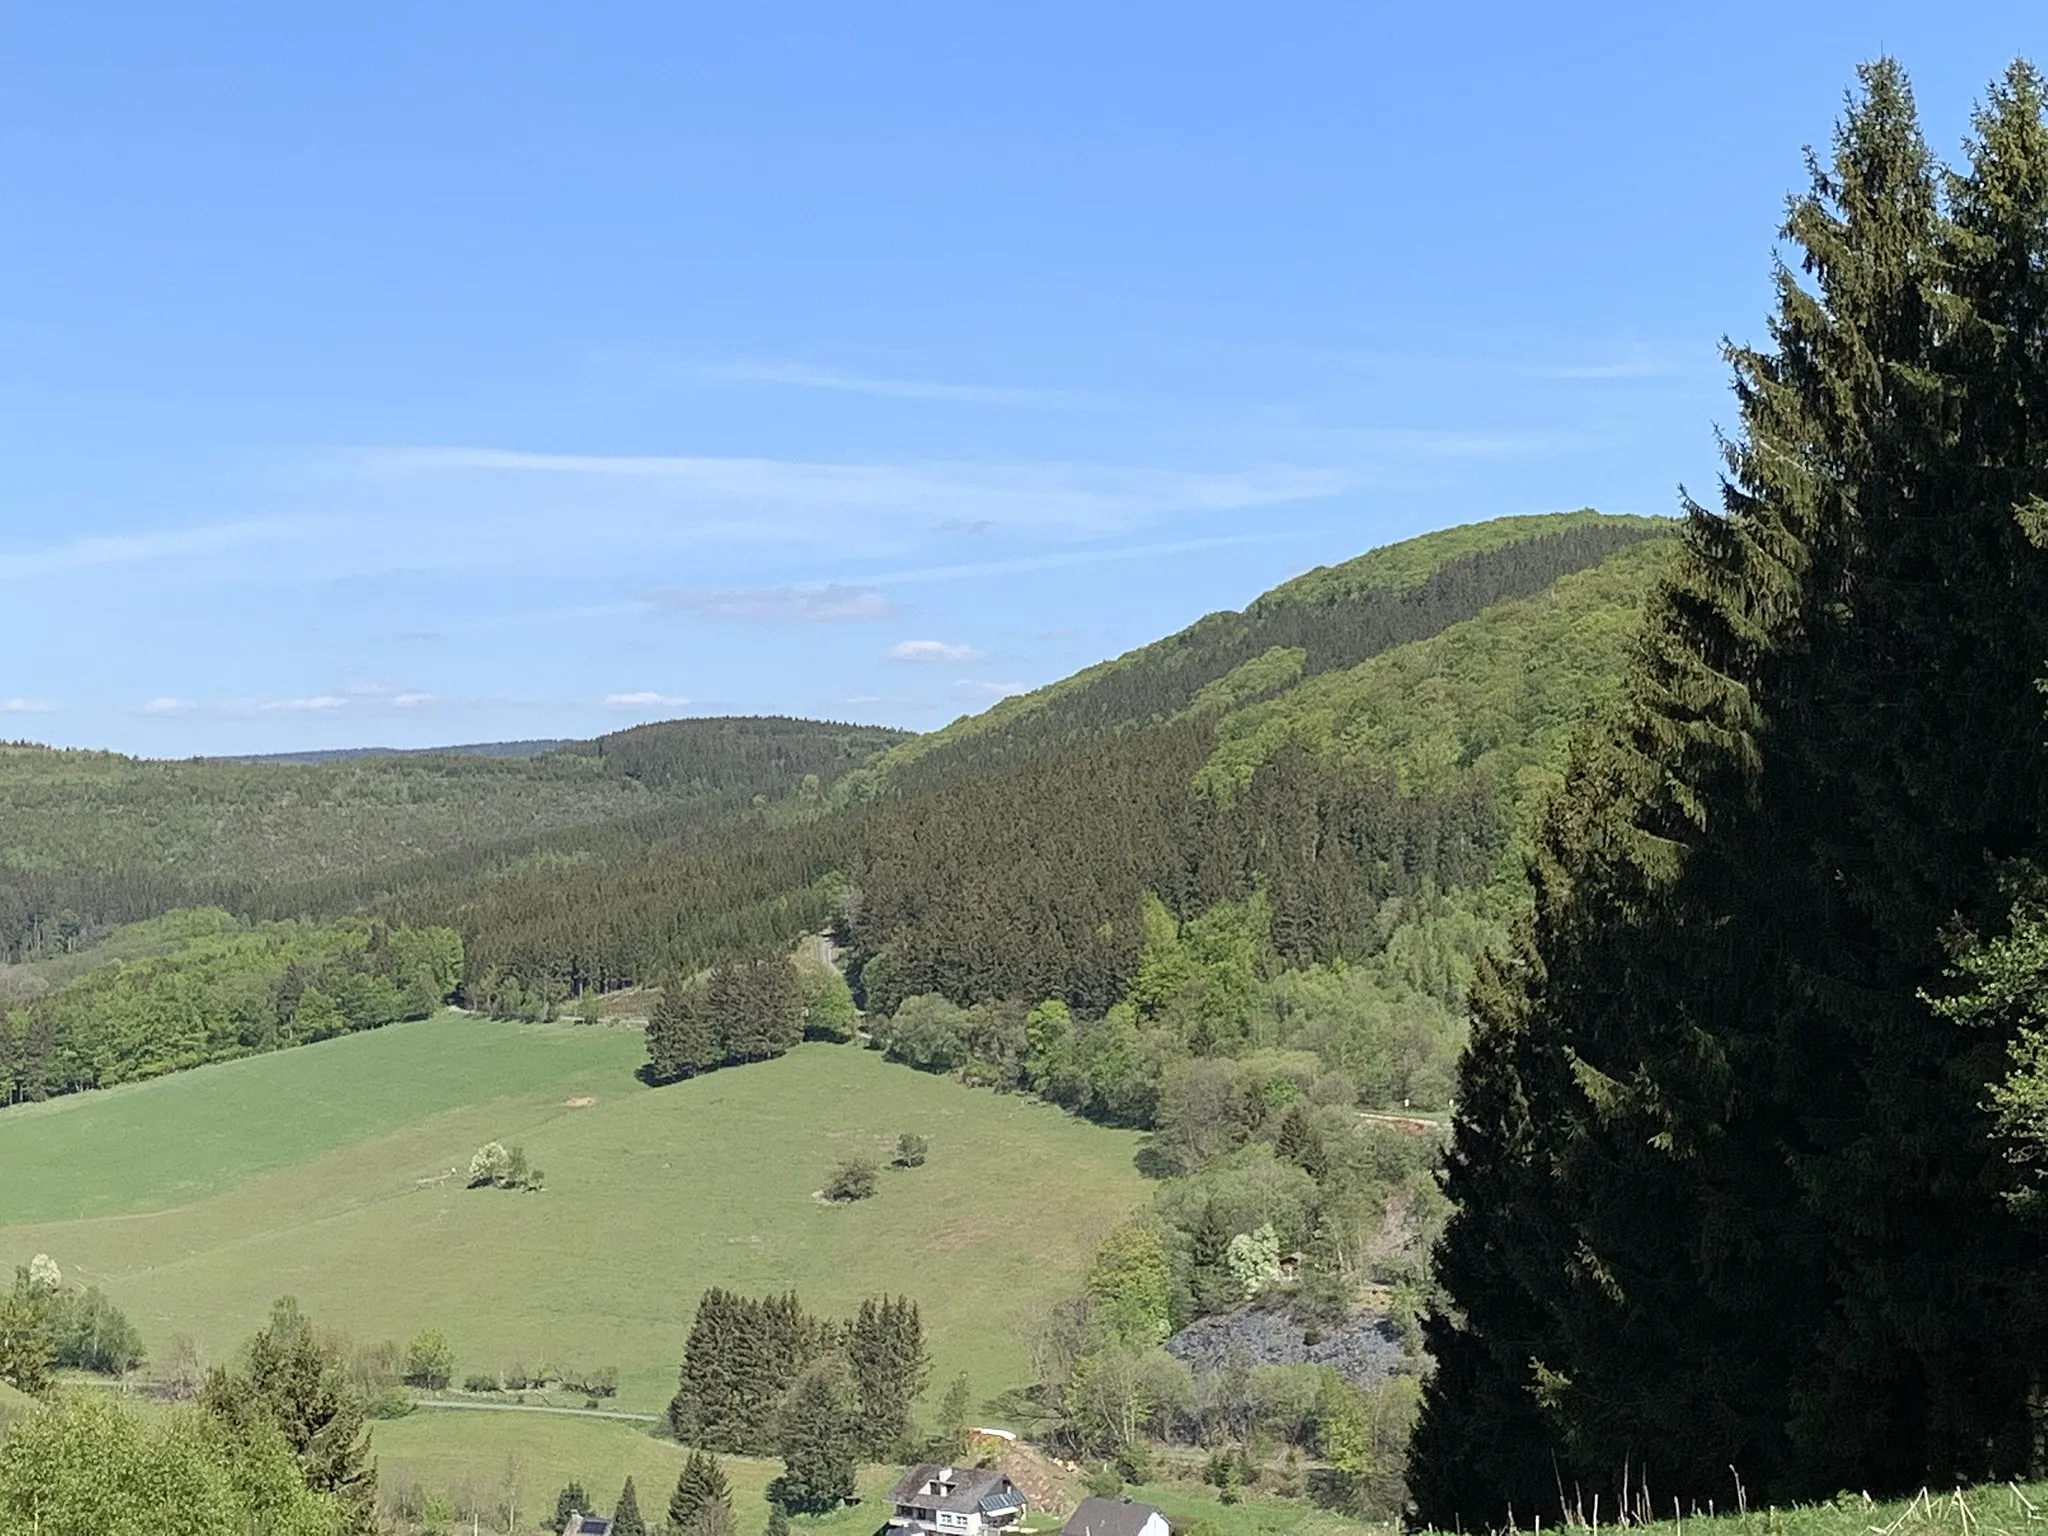 Photo showing: Almost 800 Meters high, this Mountain called Nordhelle is close to Silbach